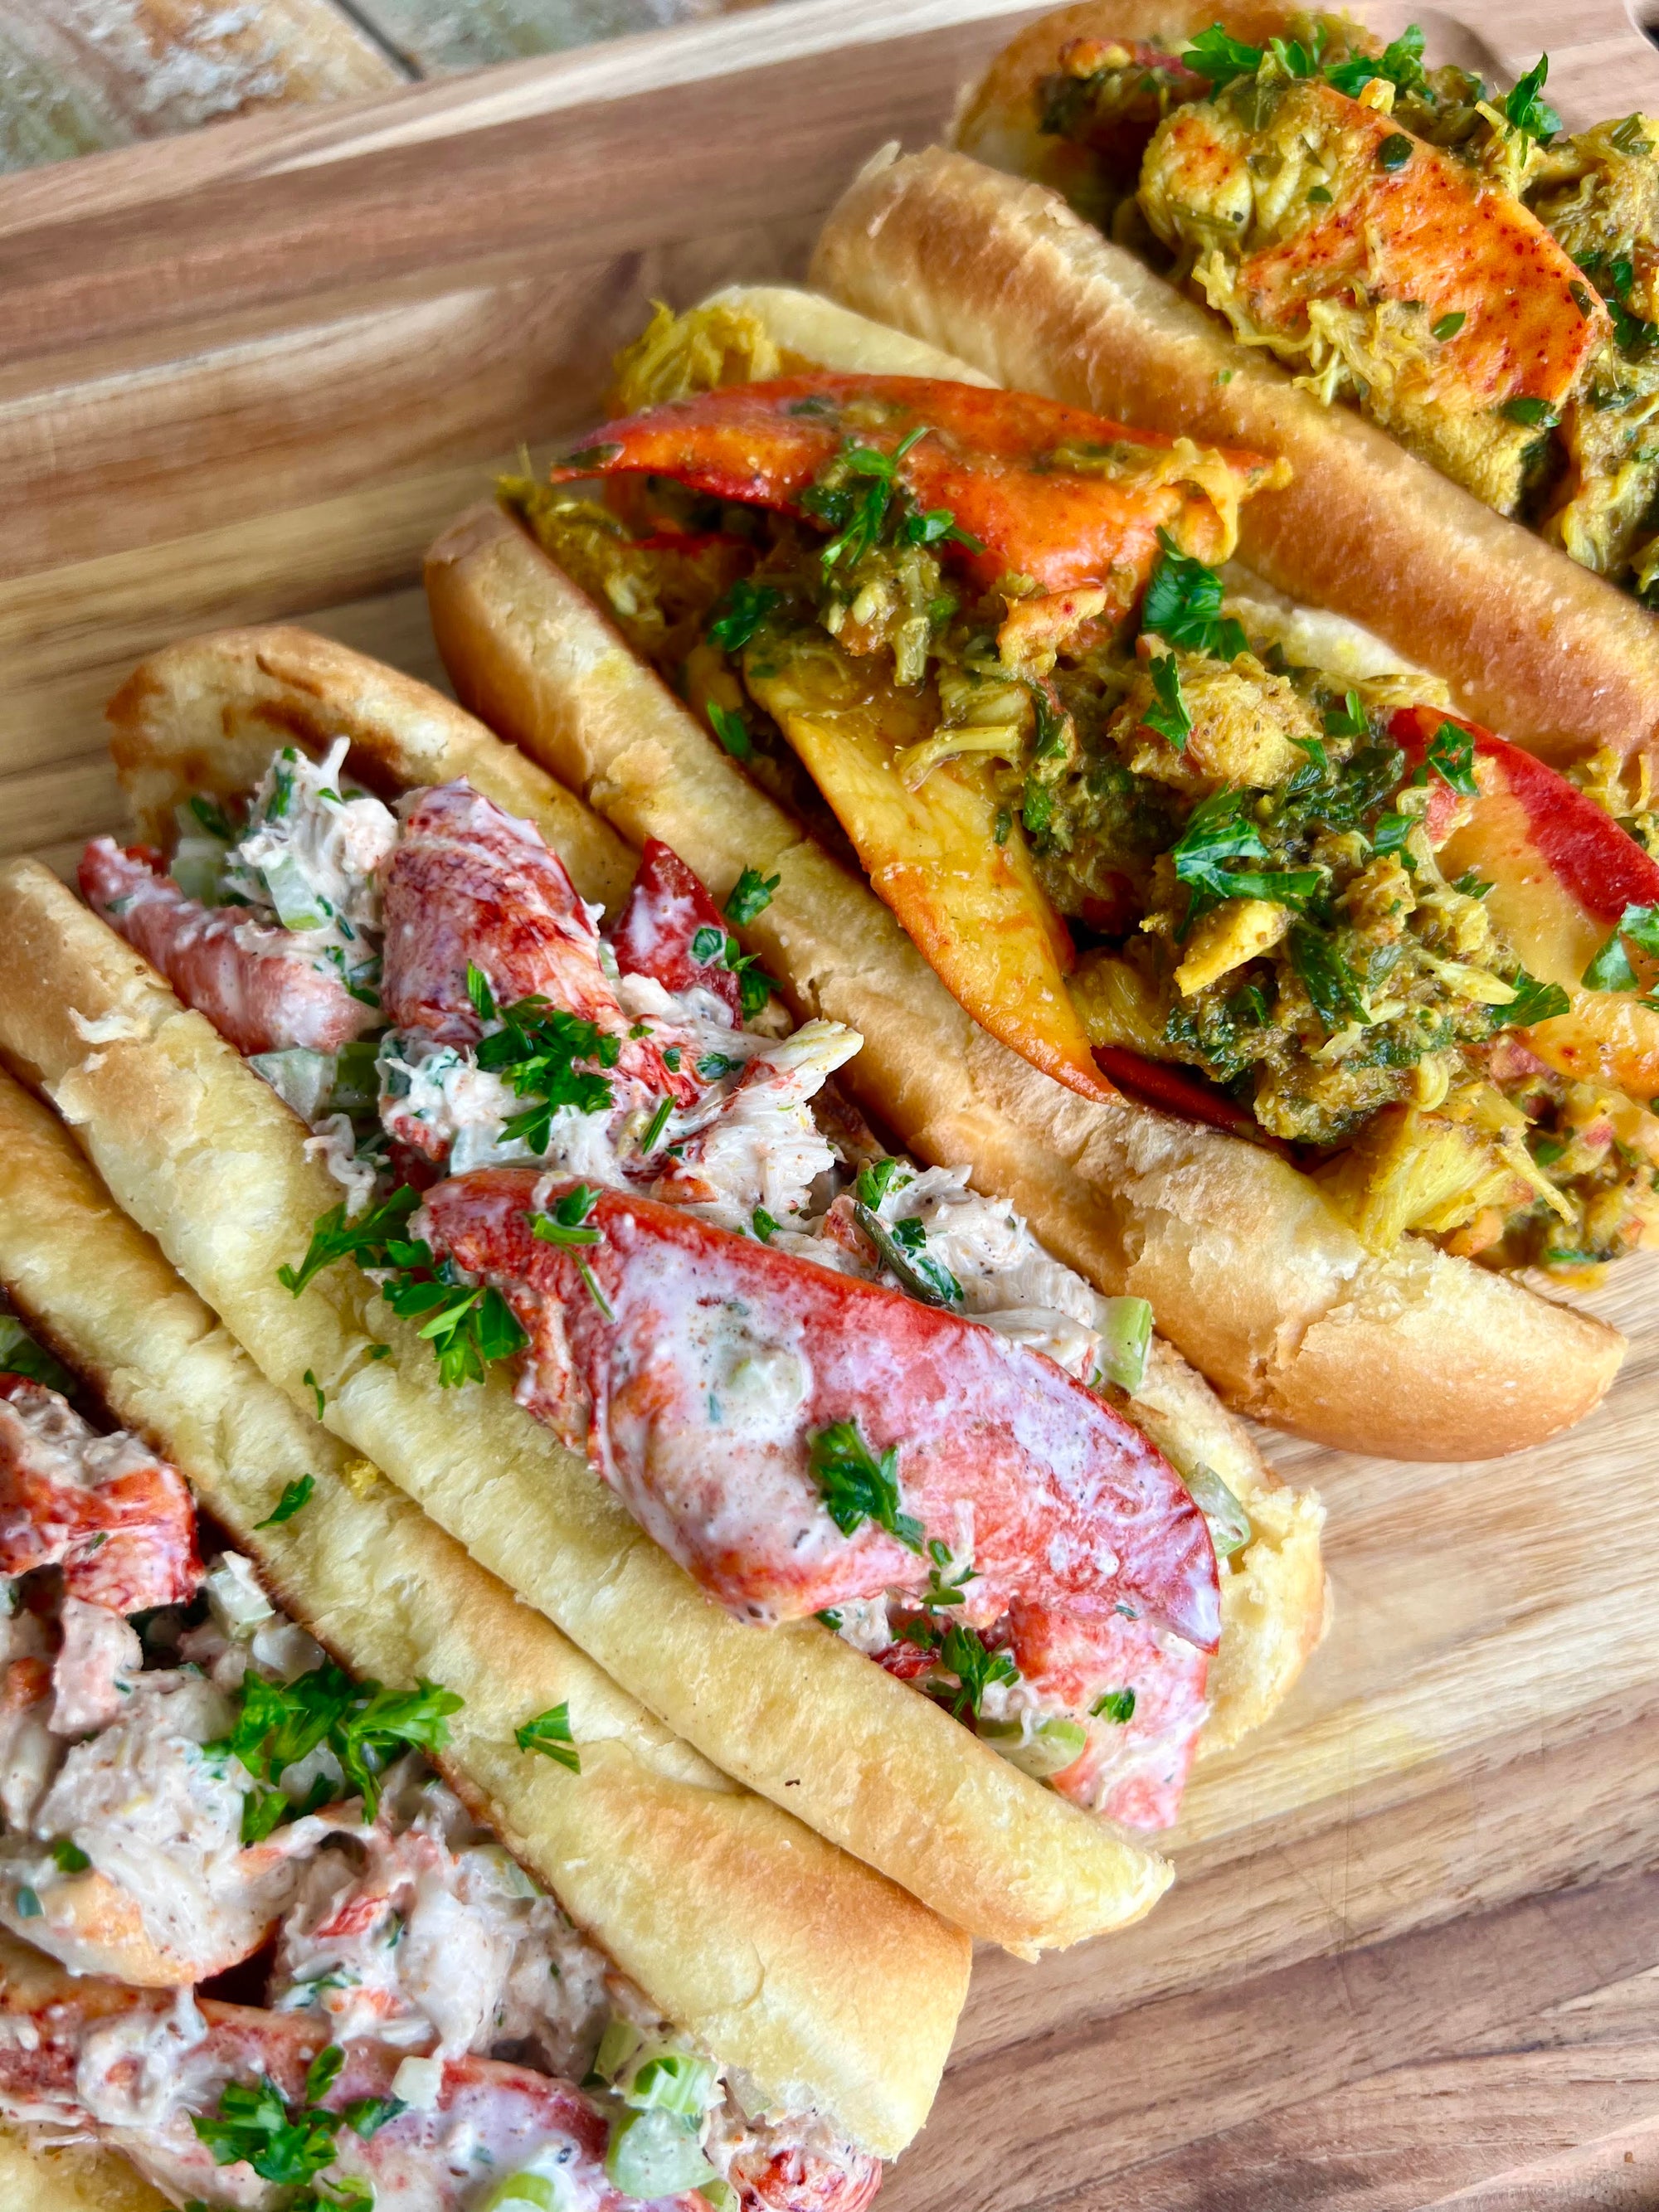 Lobster Rolls with a Jamaican Twist